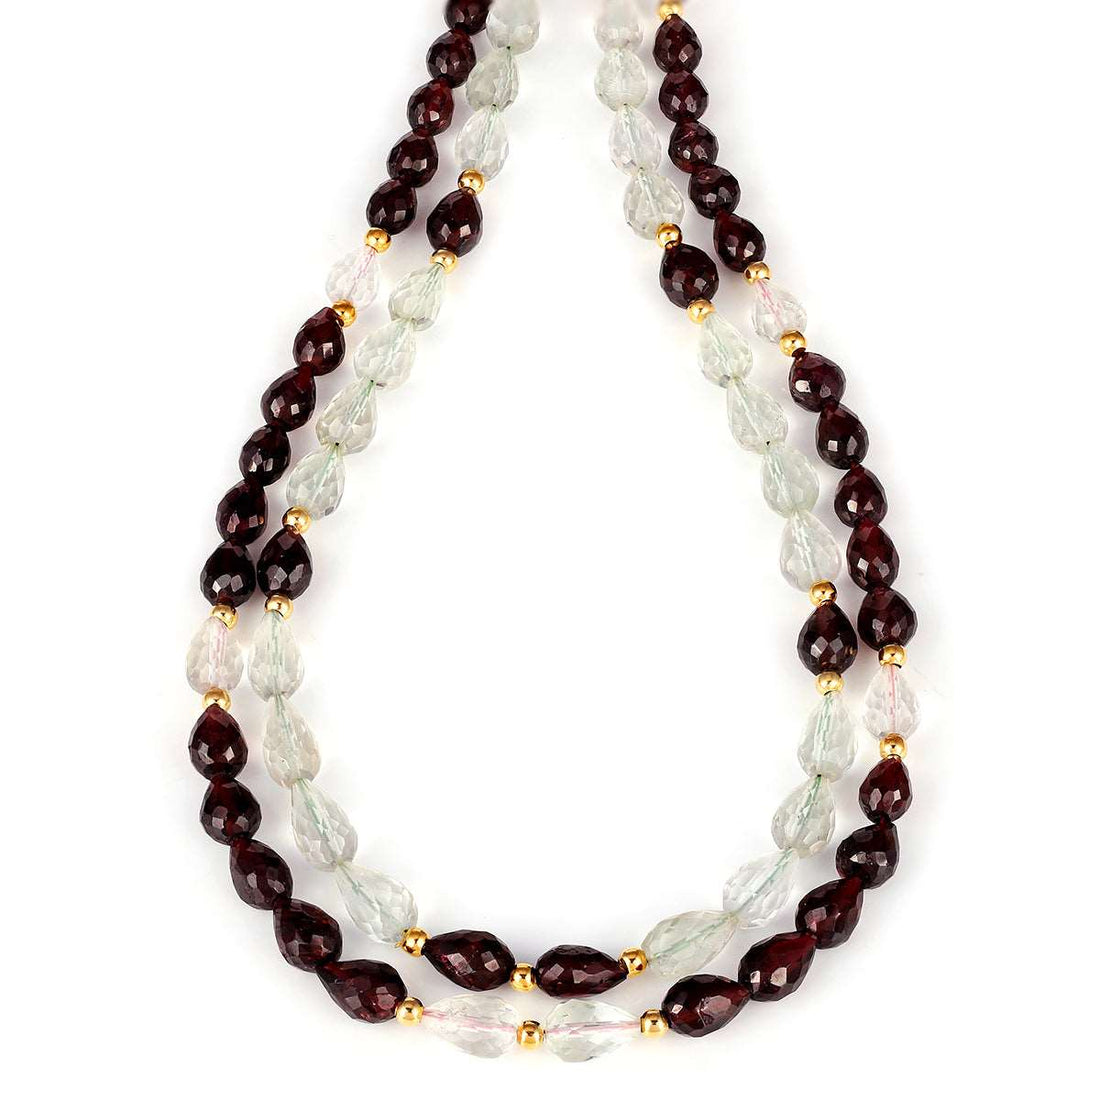 Amethyst and Garnet Layered Necklace